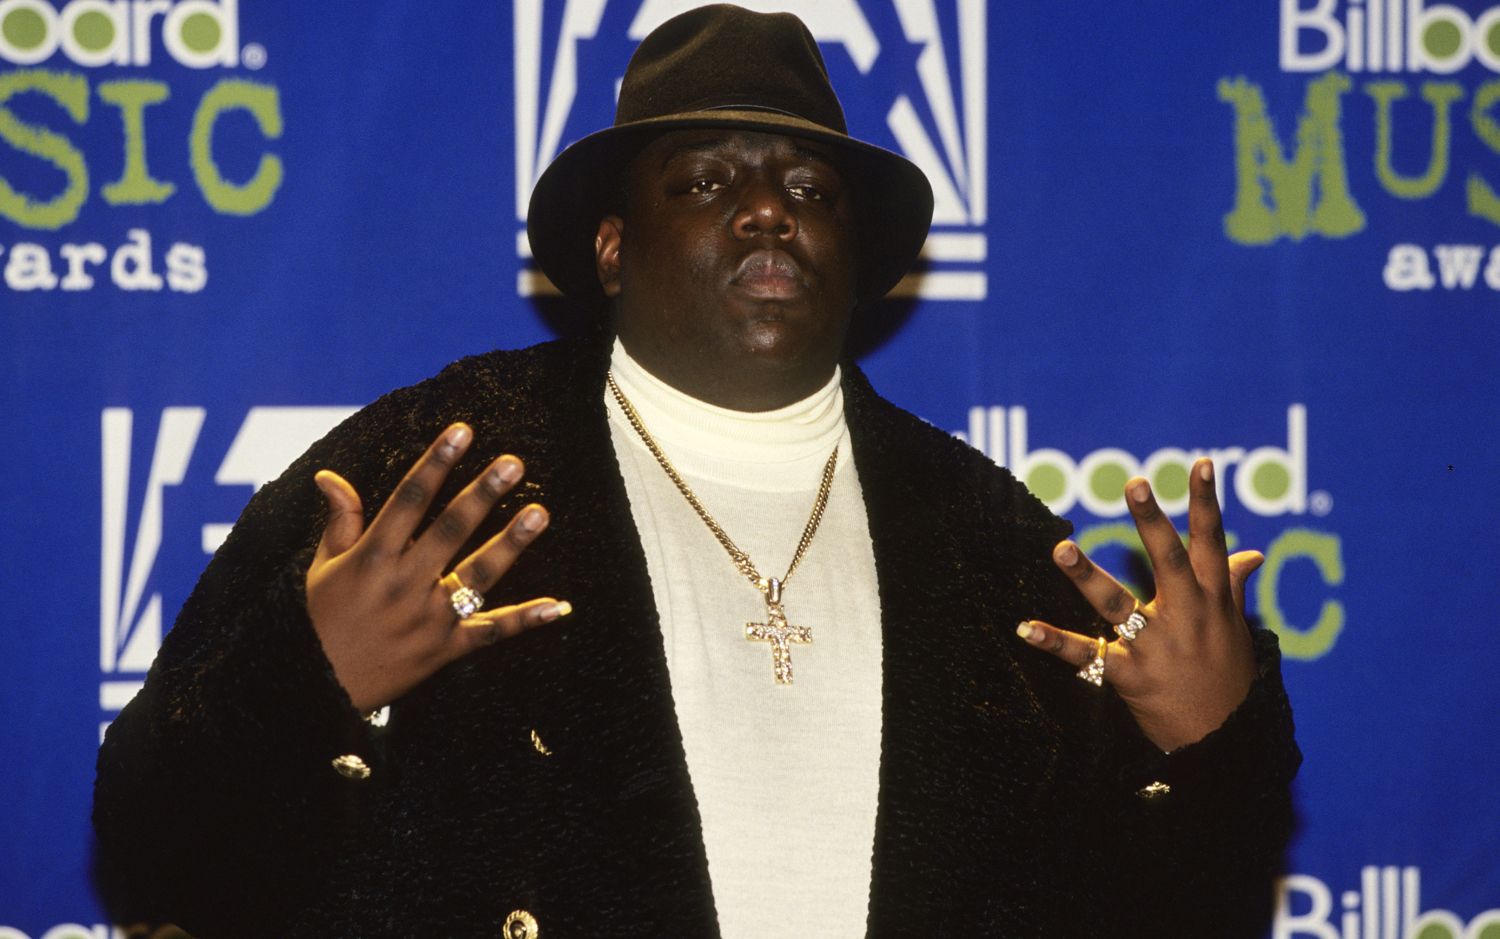 Notorious B.I.G.: The Legend's Legacy Shines Through the Son